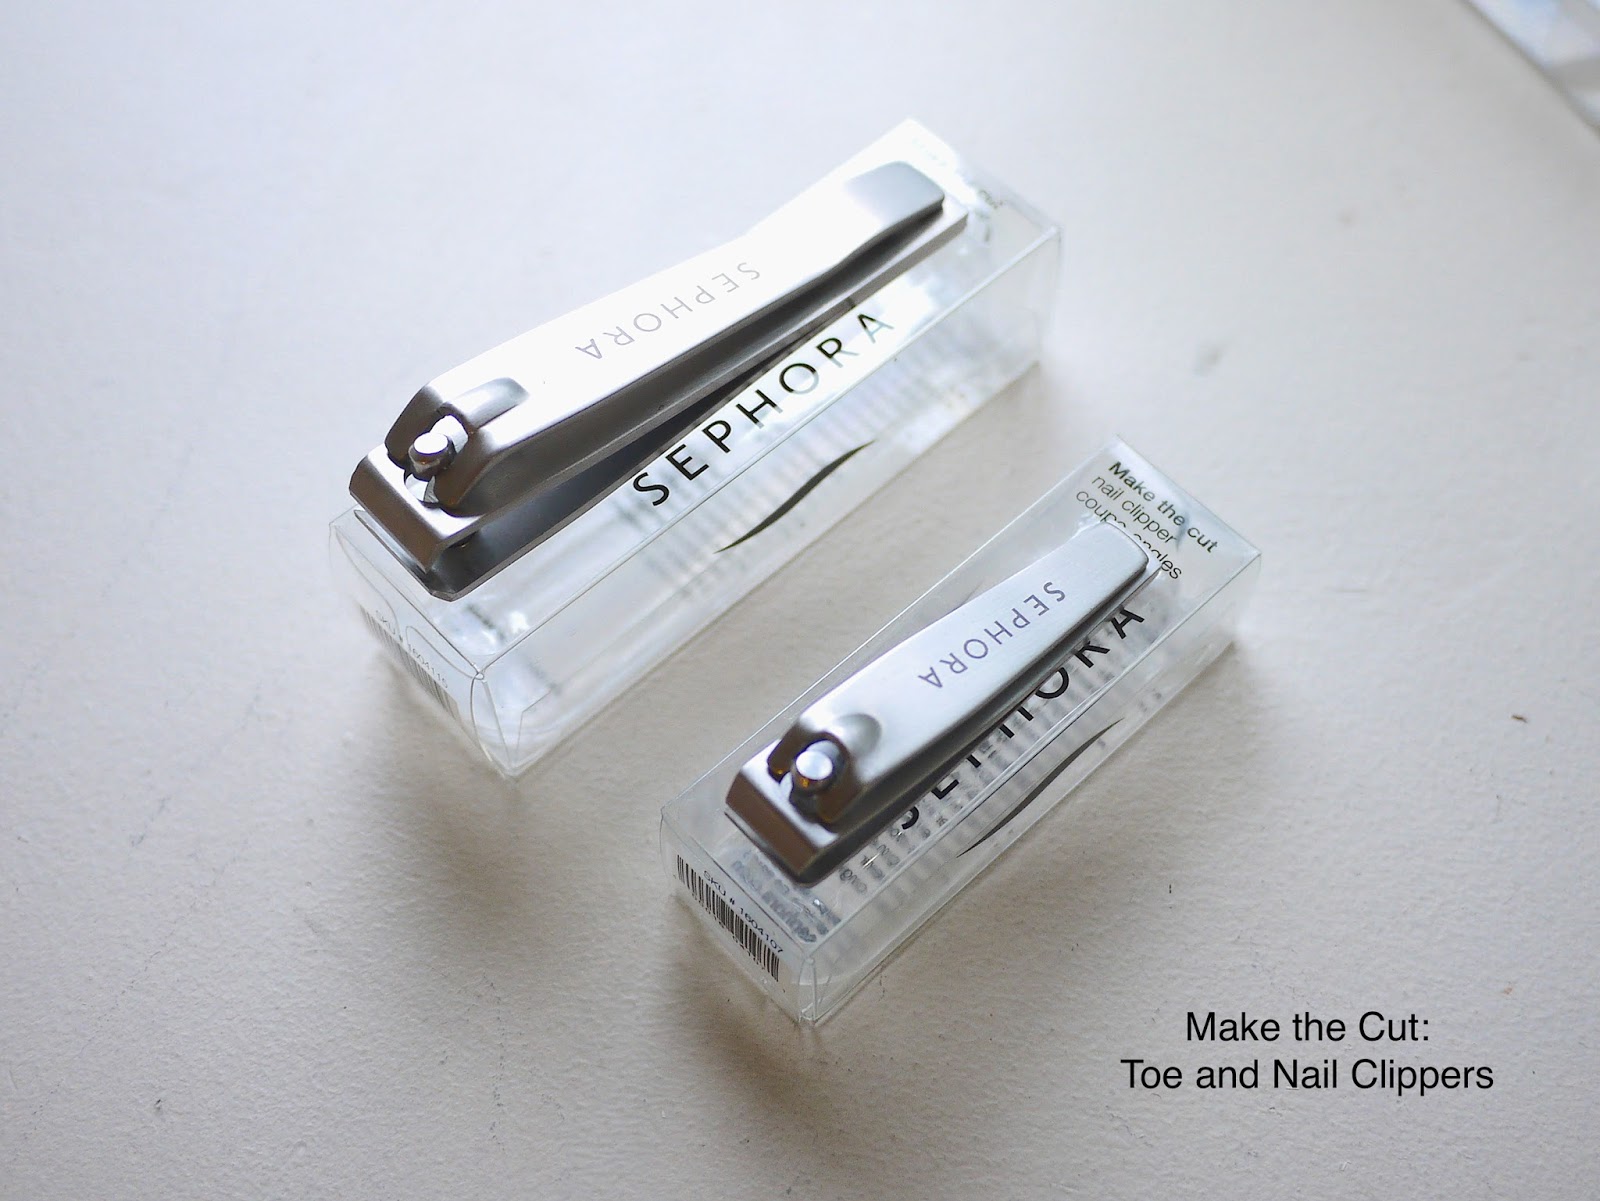 sephora nail and manicure tools review Make the Cut toe and nail clippers